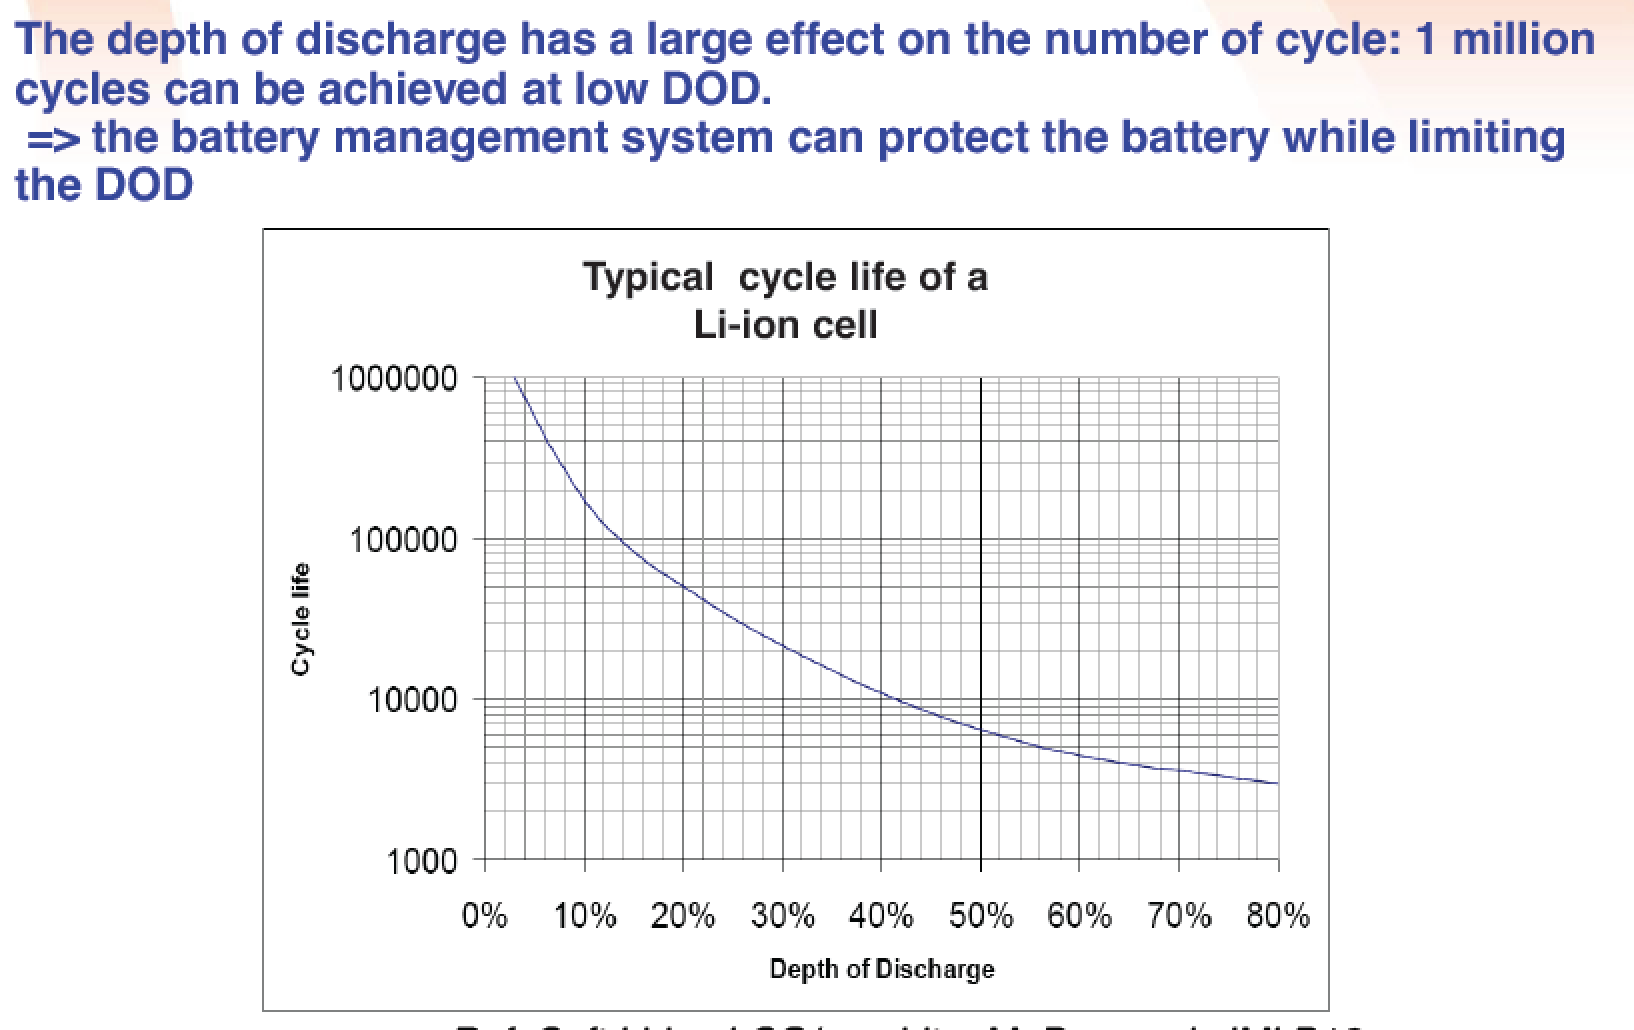 Depth of Discharge and Lithium Battery Life in cycles